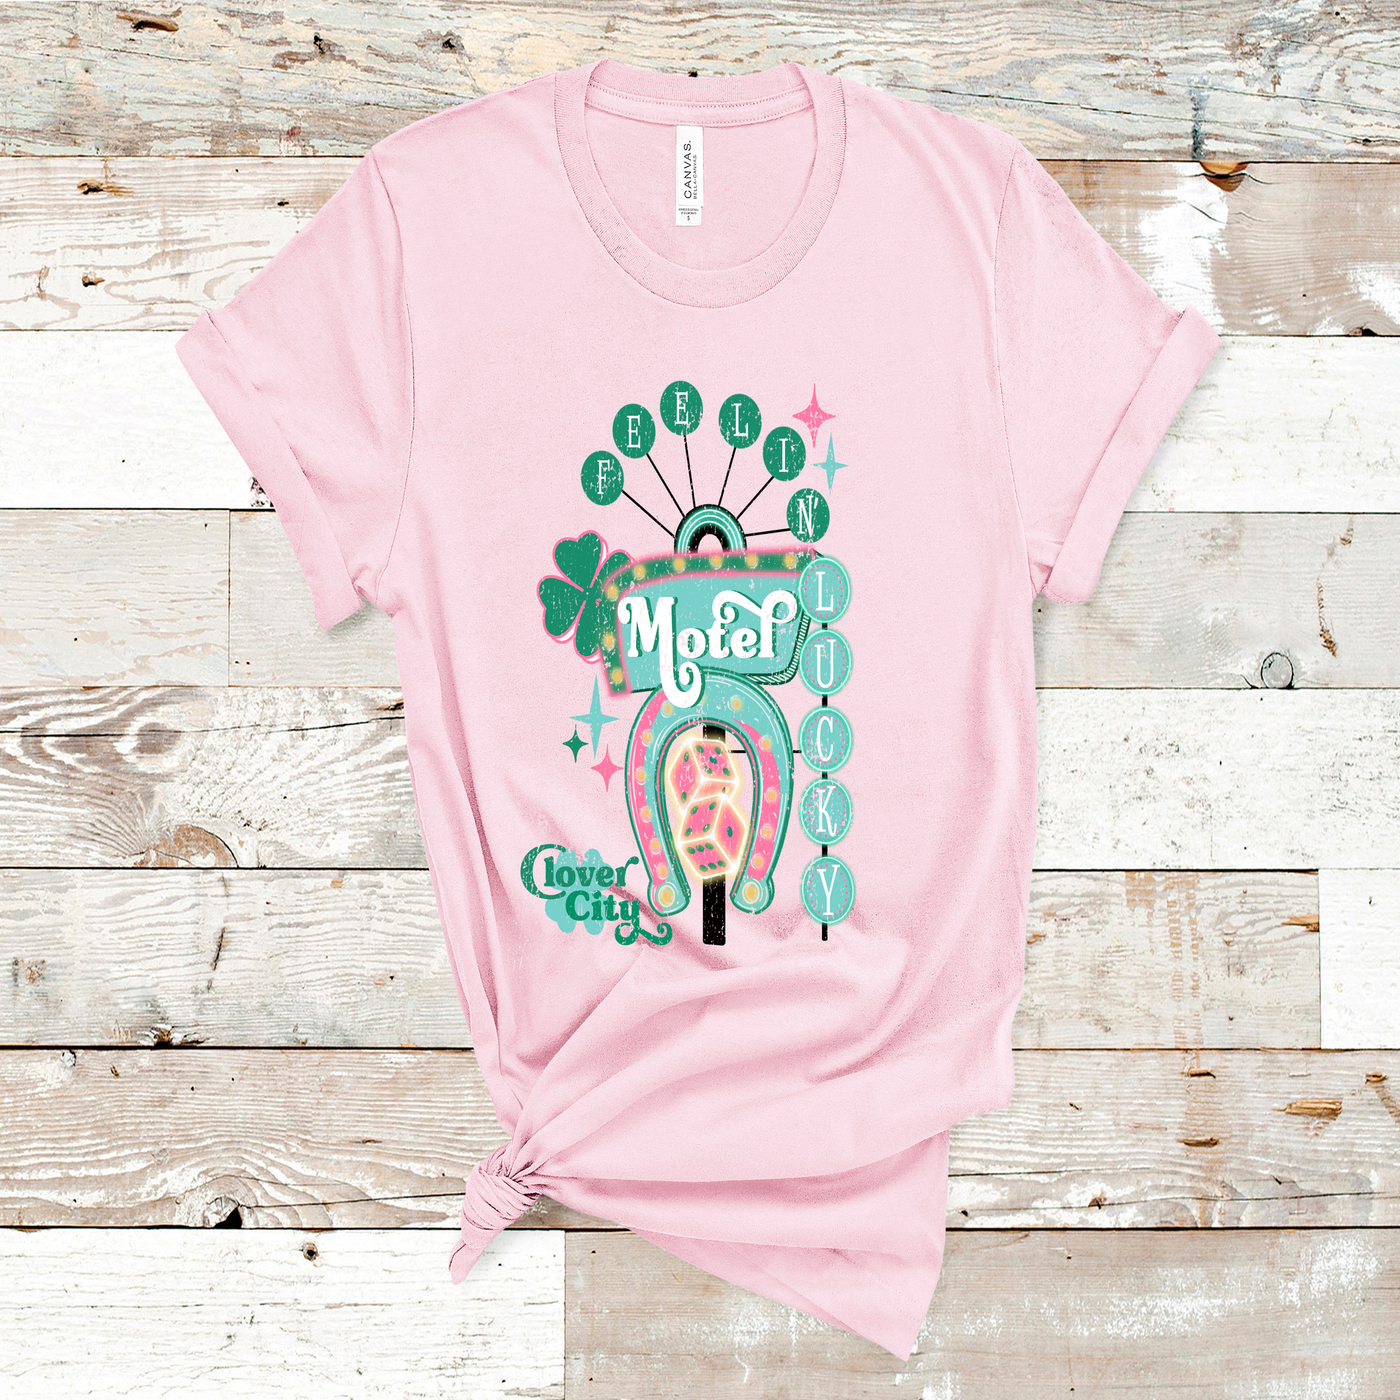 Pink Tee. Graphic of a vintage Neon Sign The word feeling with each letter in green circles at the top with the word lucky down the side with each letter in a turquoise circle. There is a sign in the center with the word motel in it, underneath there is a horse shoe with dice inside at he bottom of the sign. There is also a four leaf clover with the word clover city over it in green.